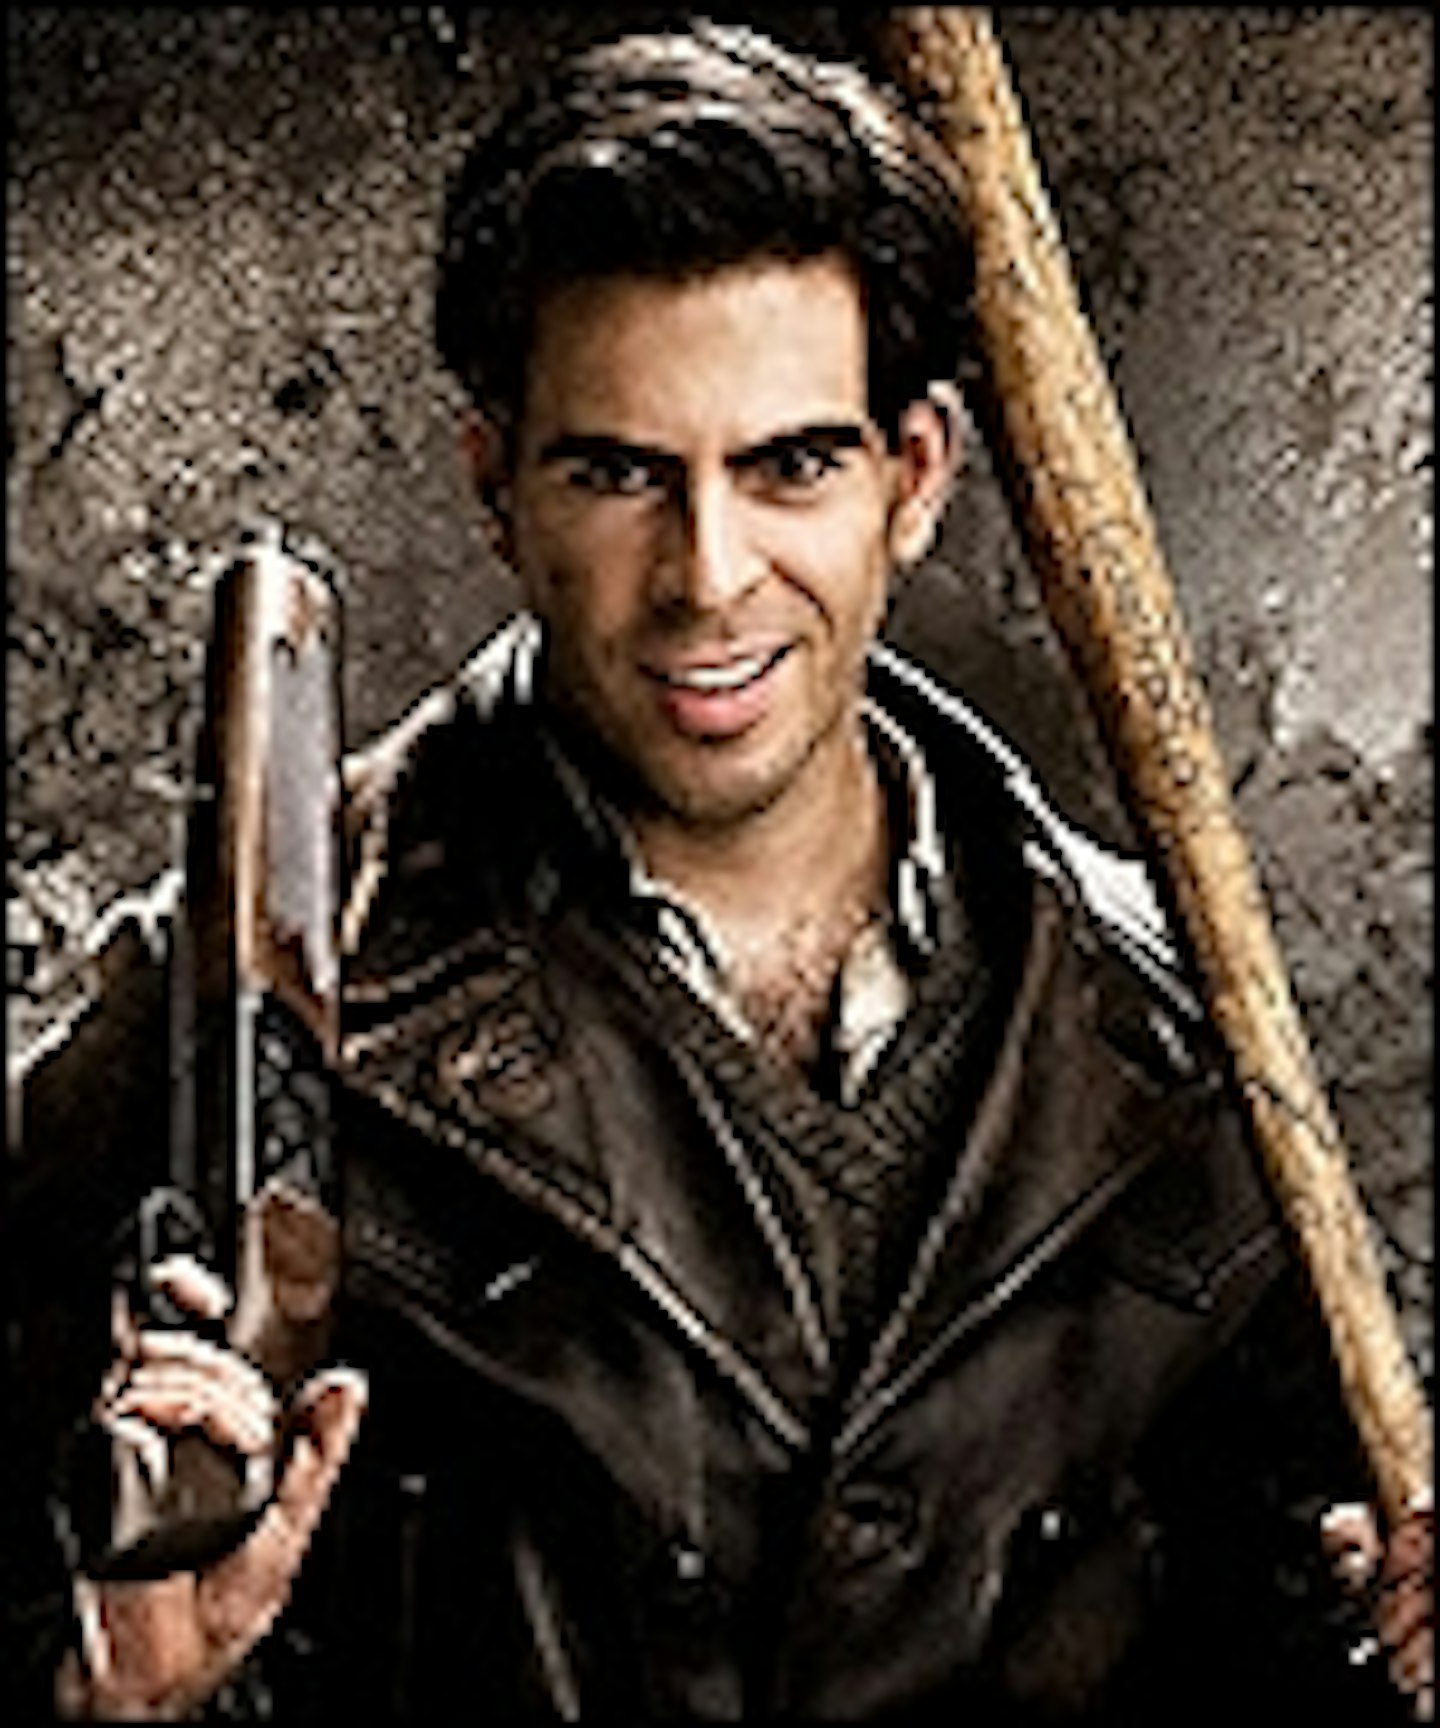 Two New Projects For Eli Roth